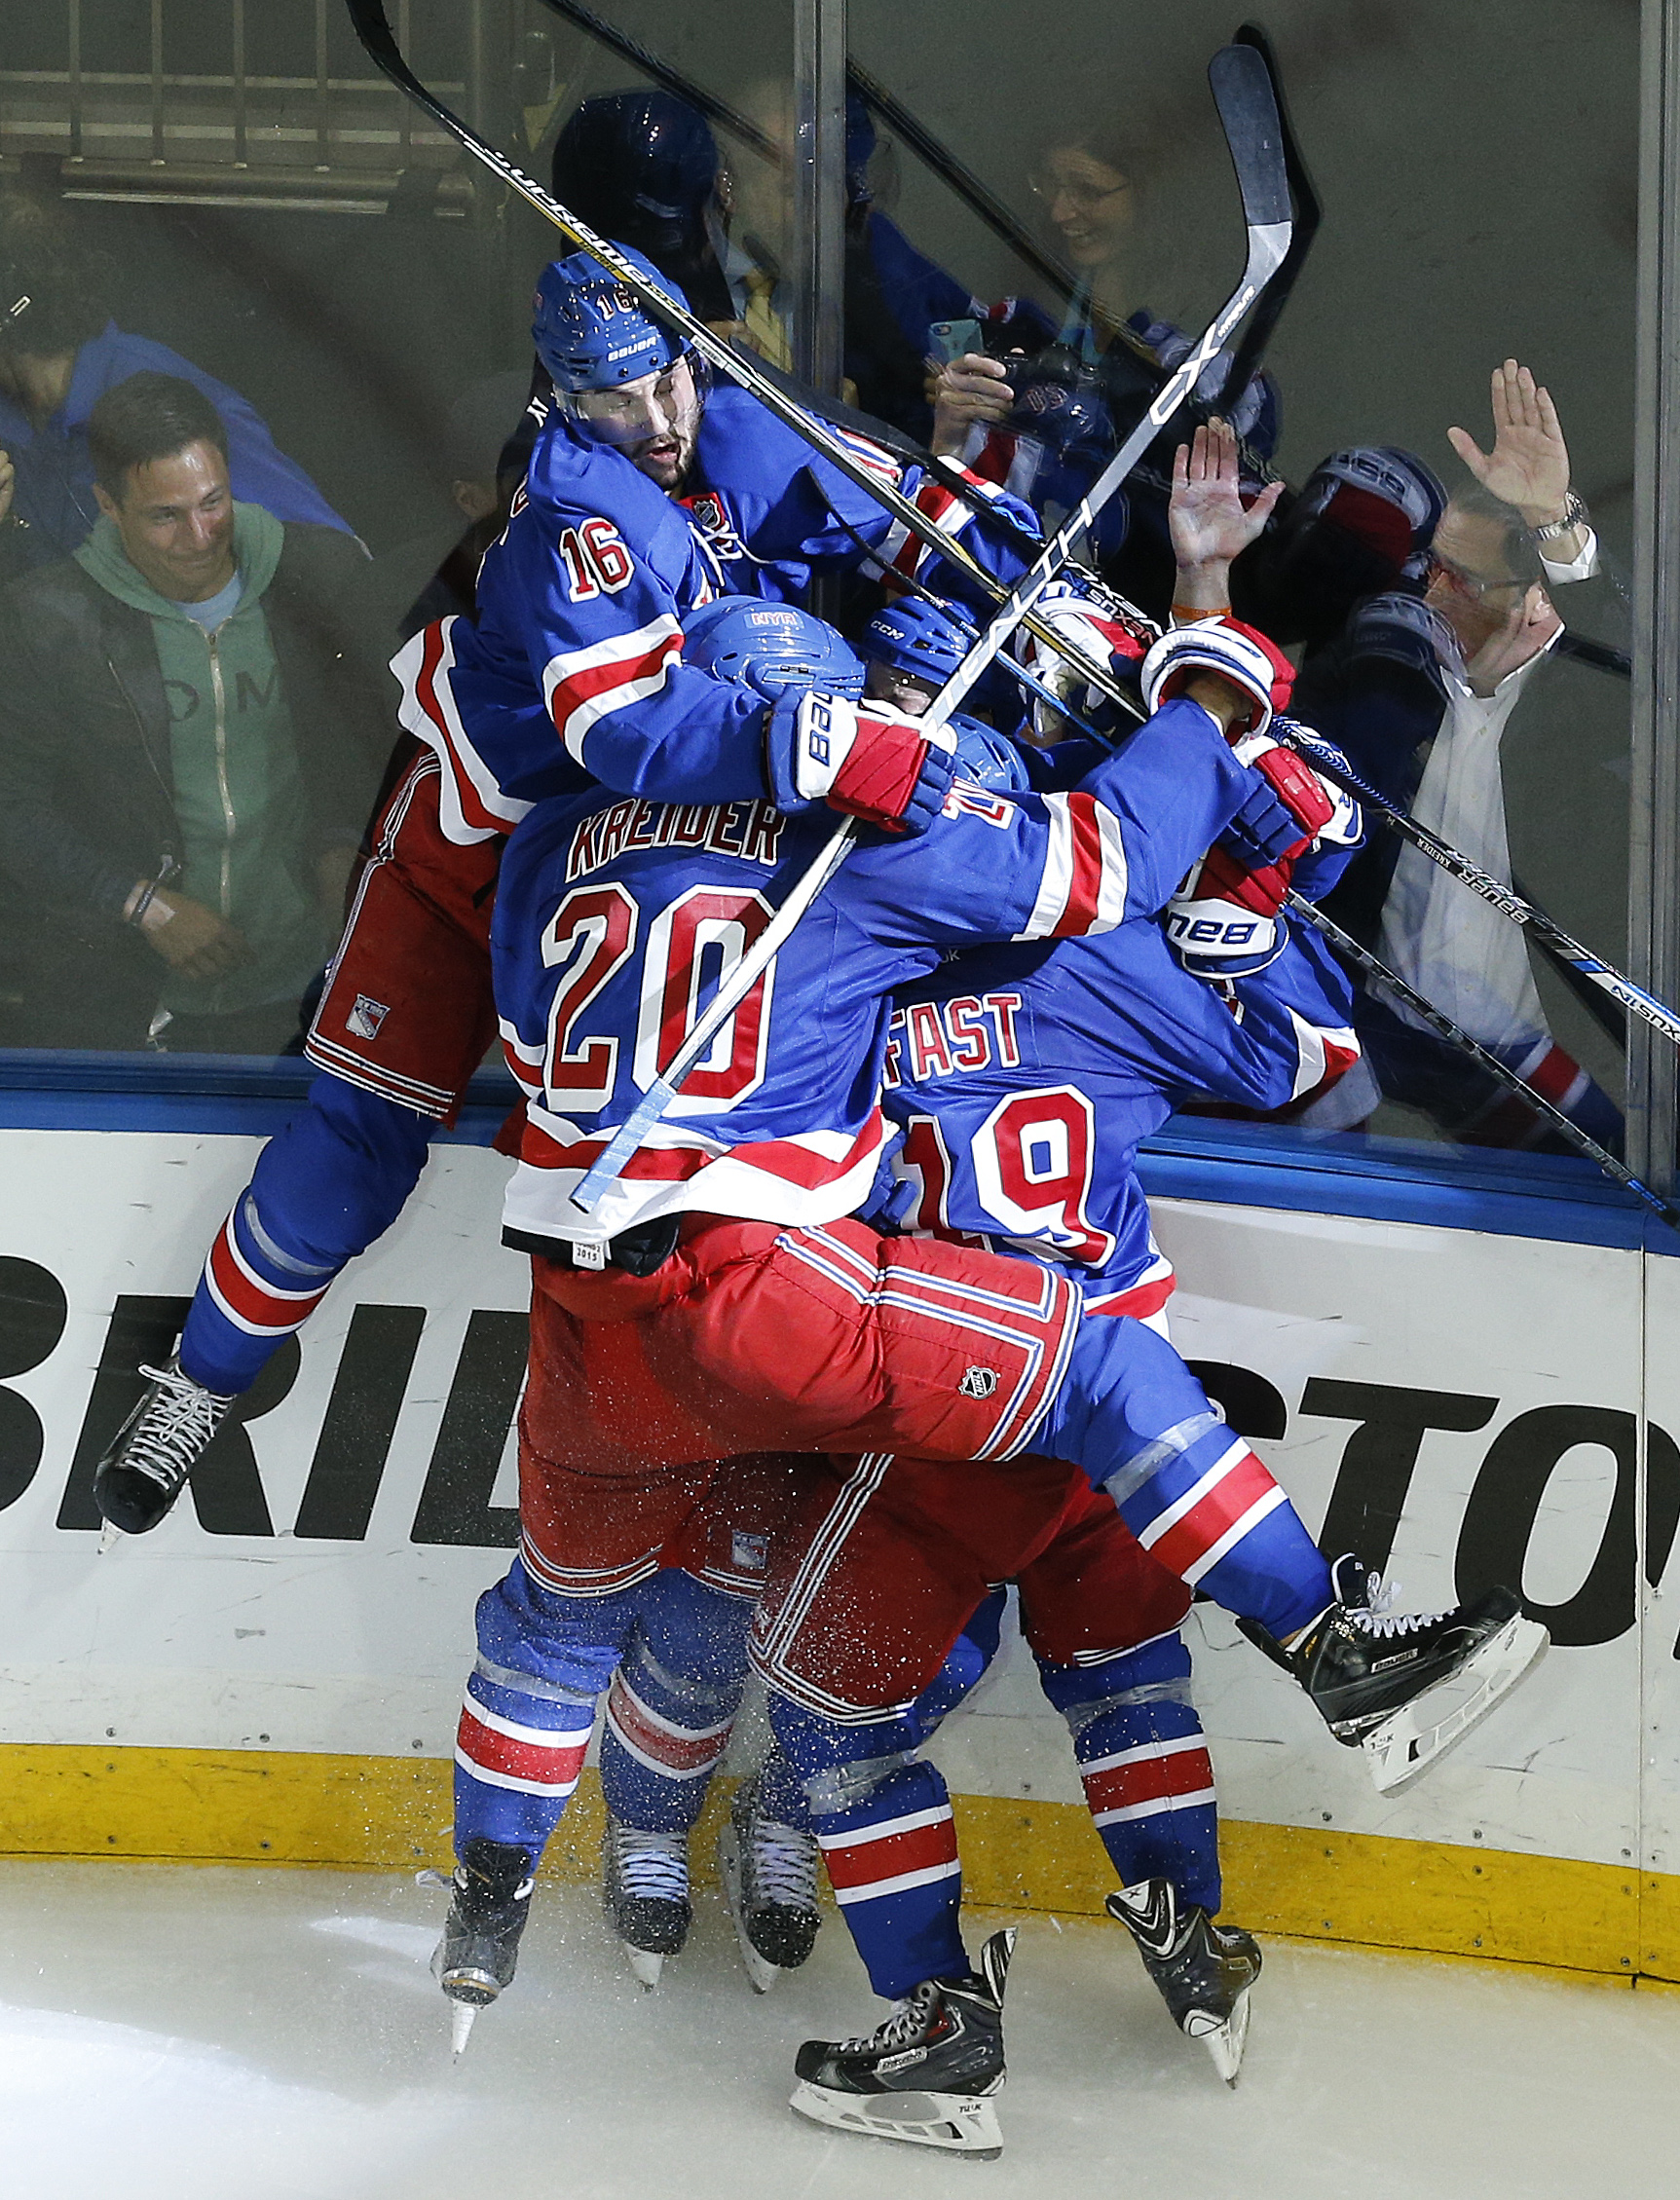 New York Rangers beat Washington Capitals in 7 to face New Jersey